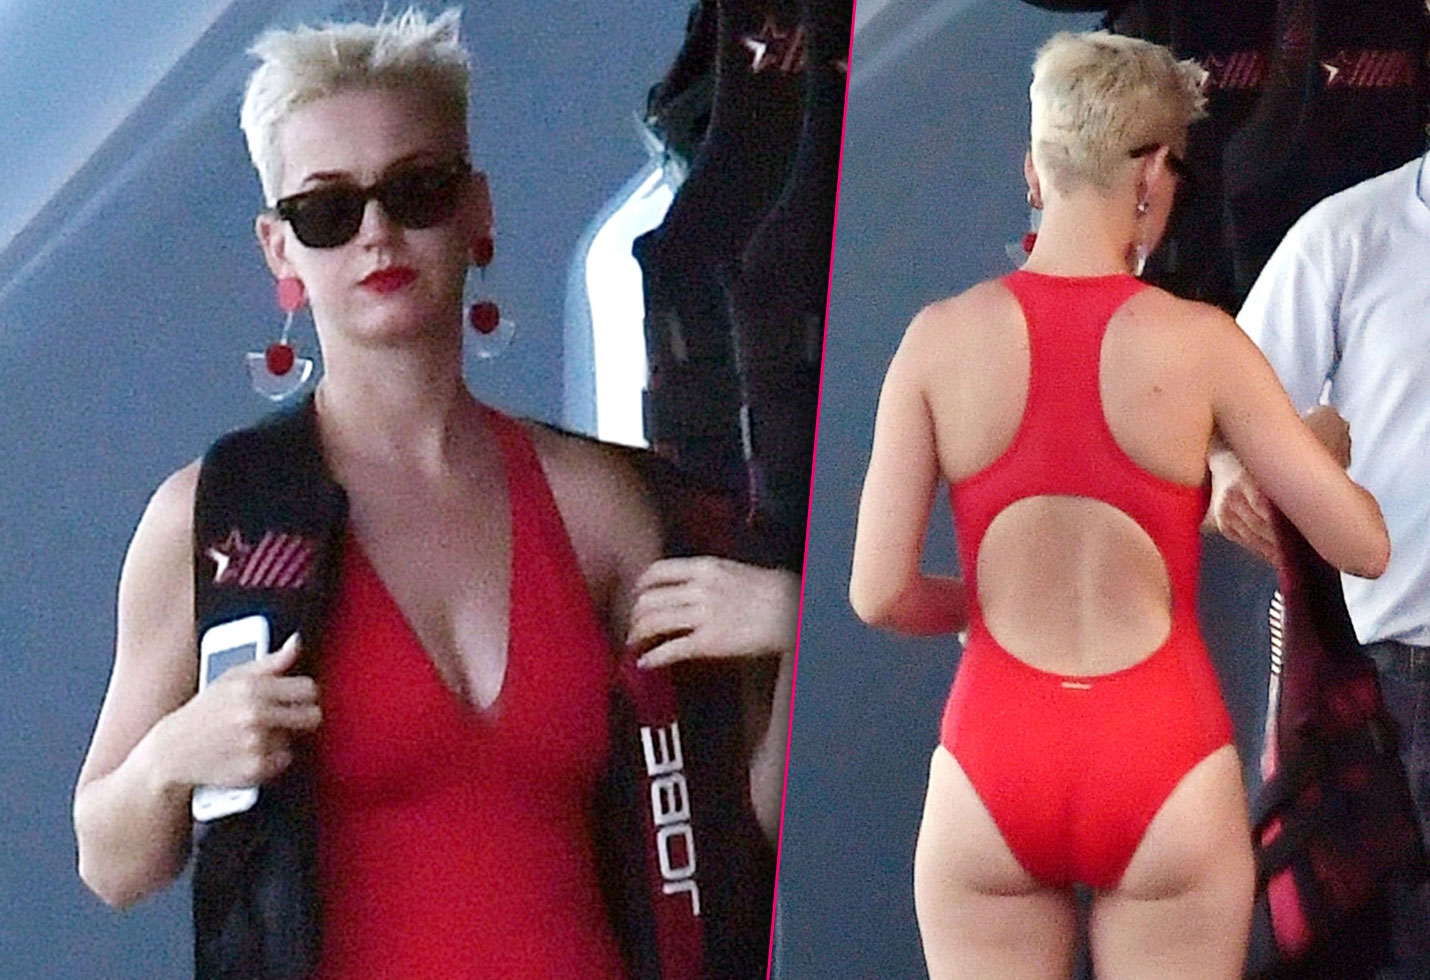 PHOTOS] Katy Perry's Butt Is Falling Out Of Her Tiny Swimsuit!